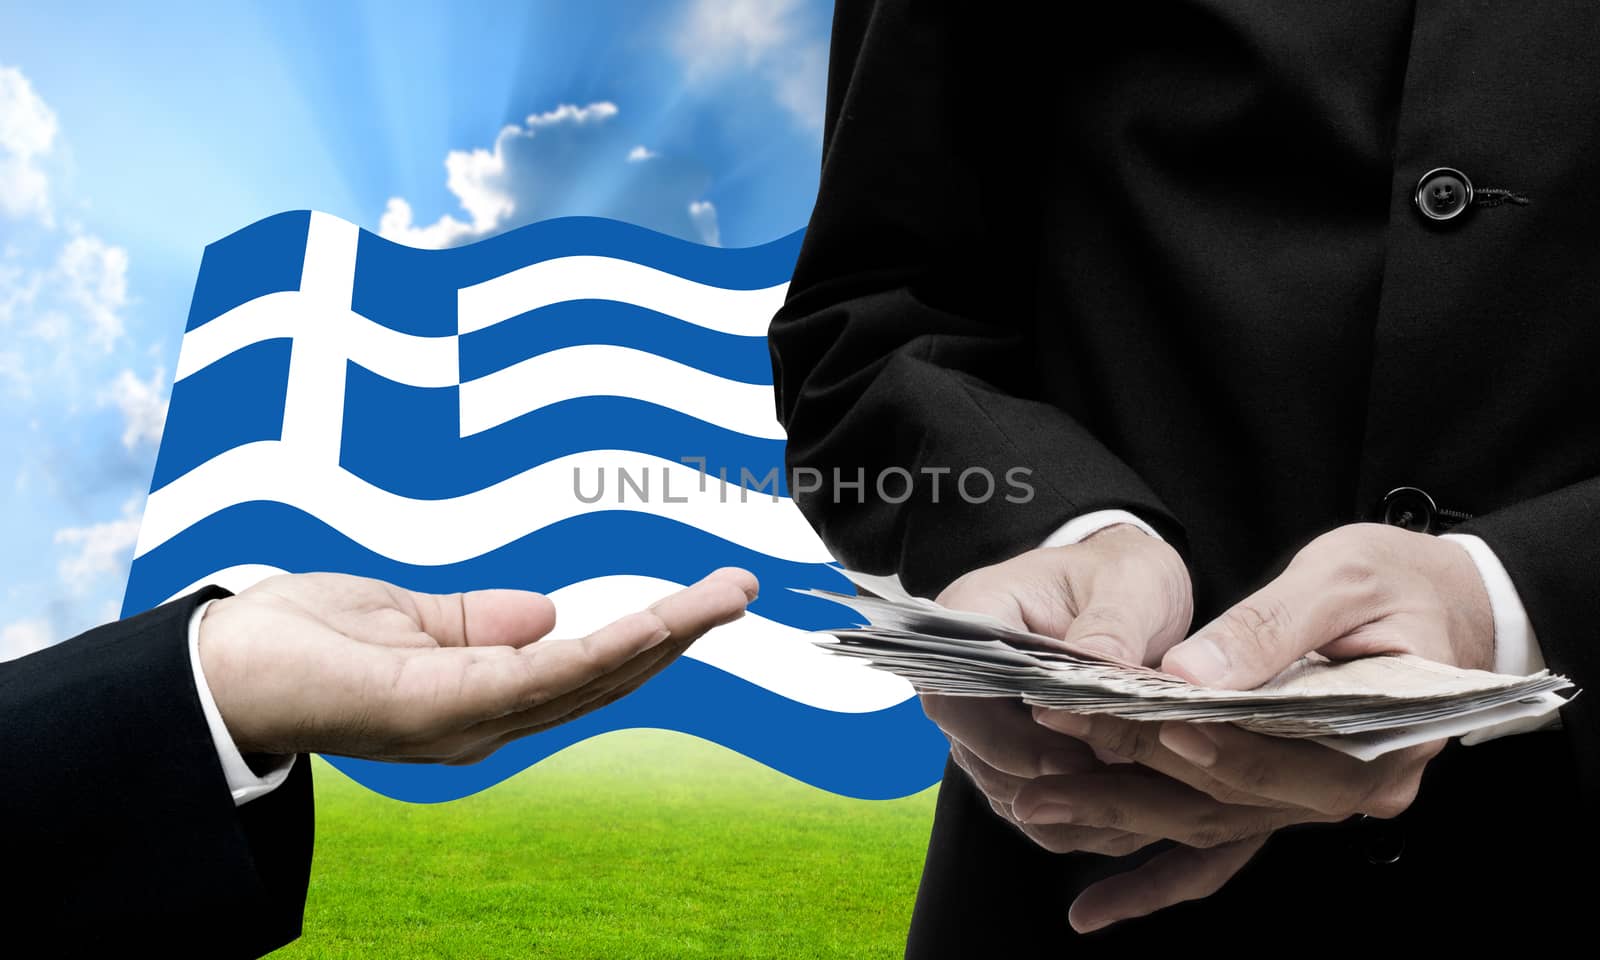 Creditor offer more loan, Greece’s Debt Crisis concept by pixbox77